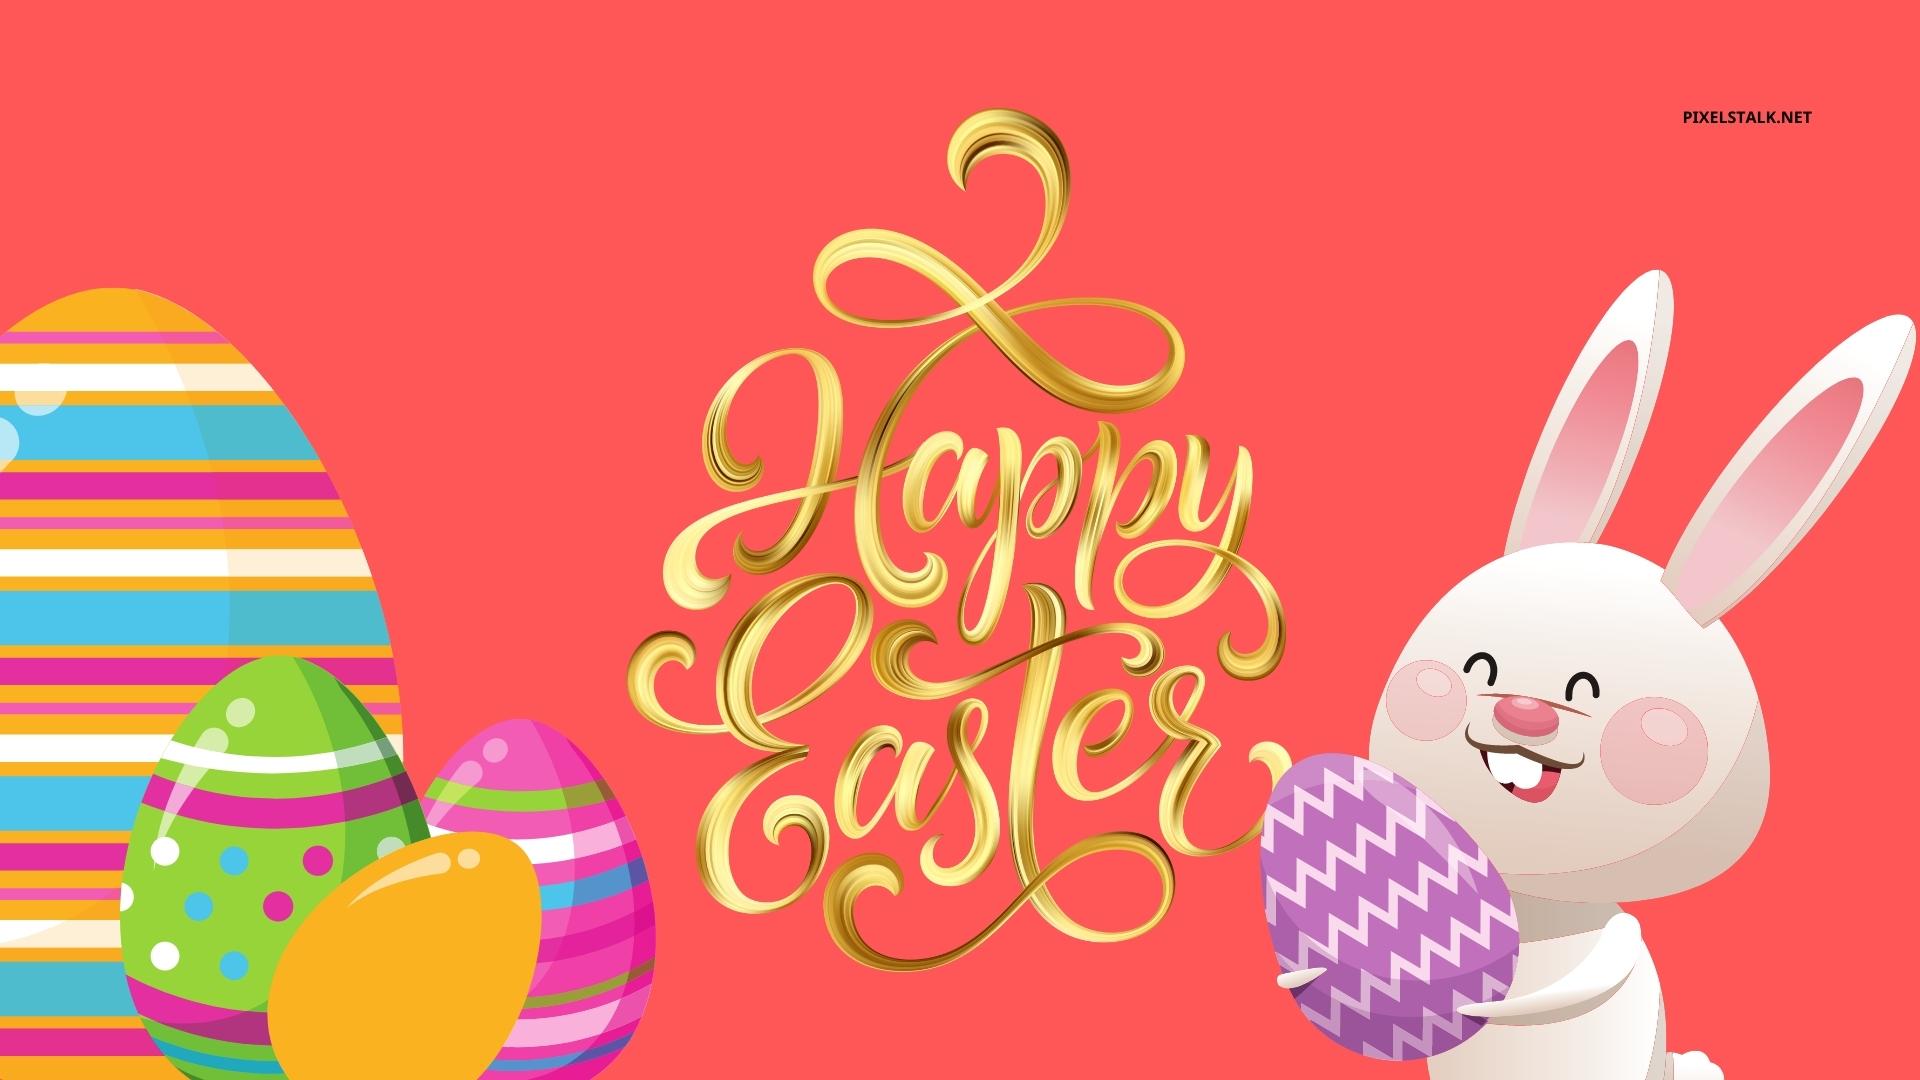 Happy Easter Wallpapers HD Free download 